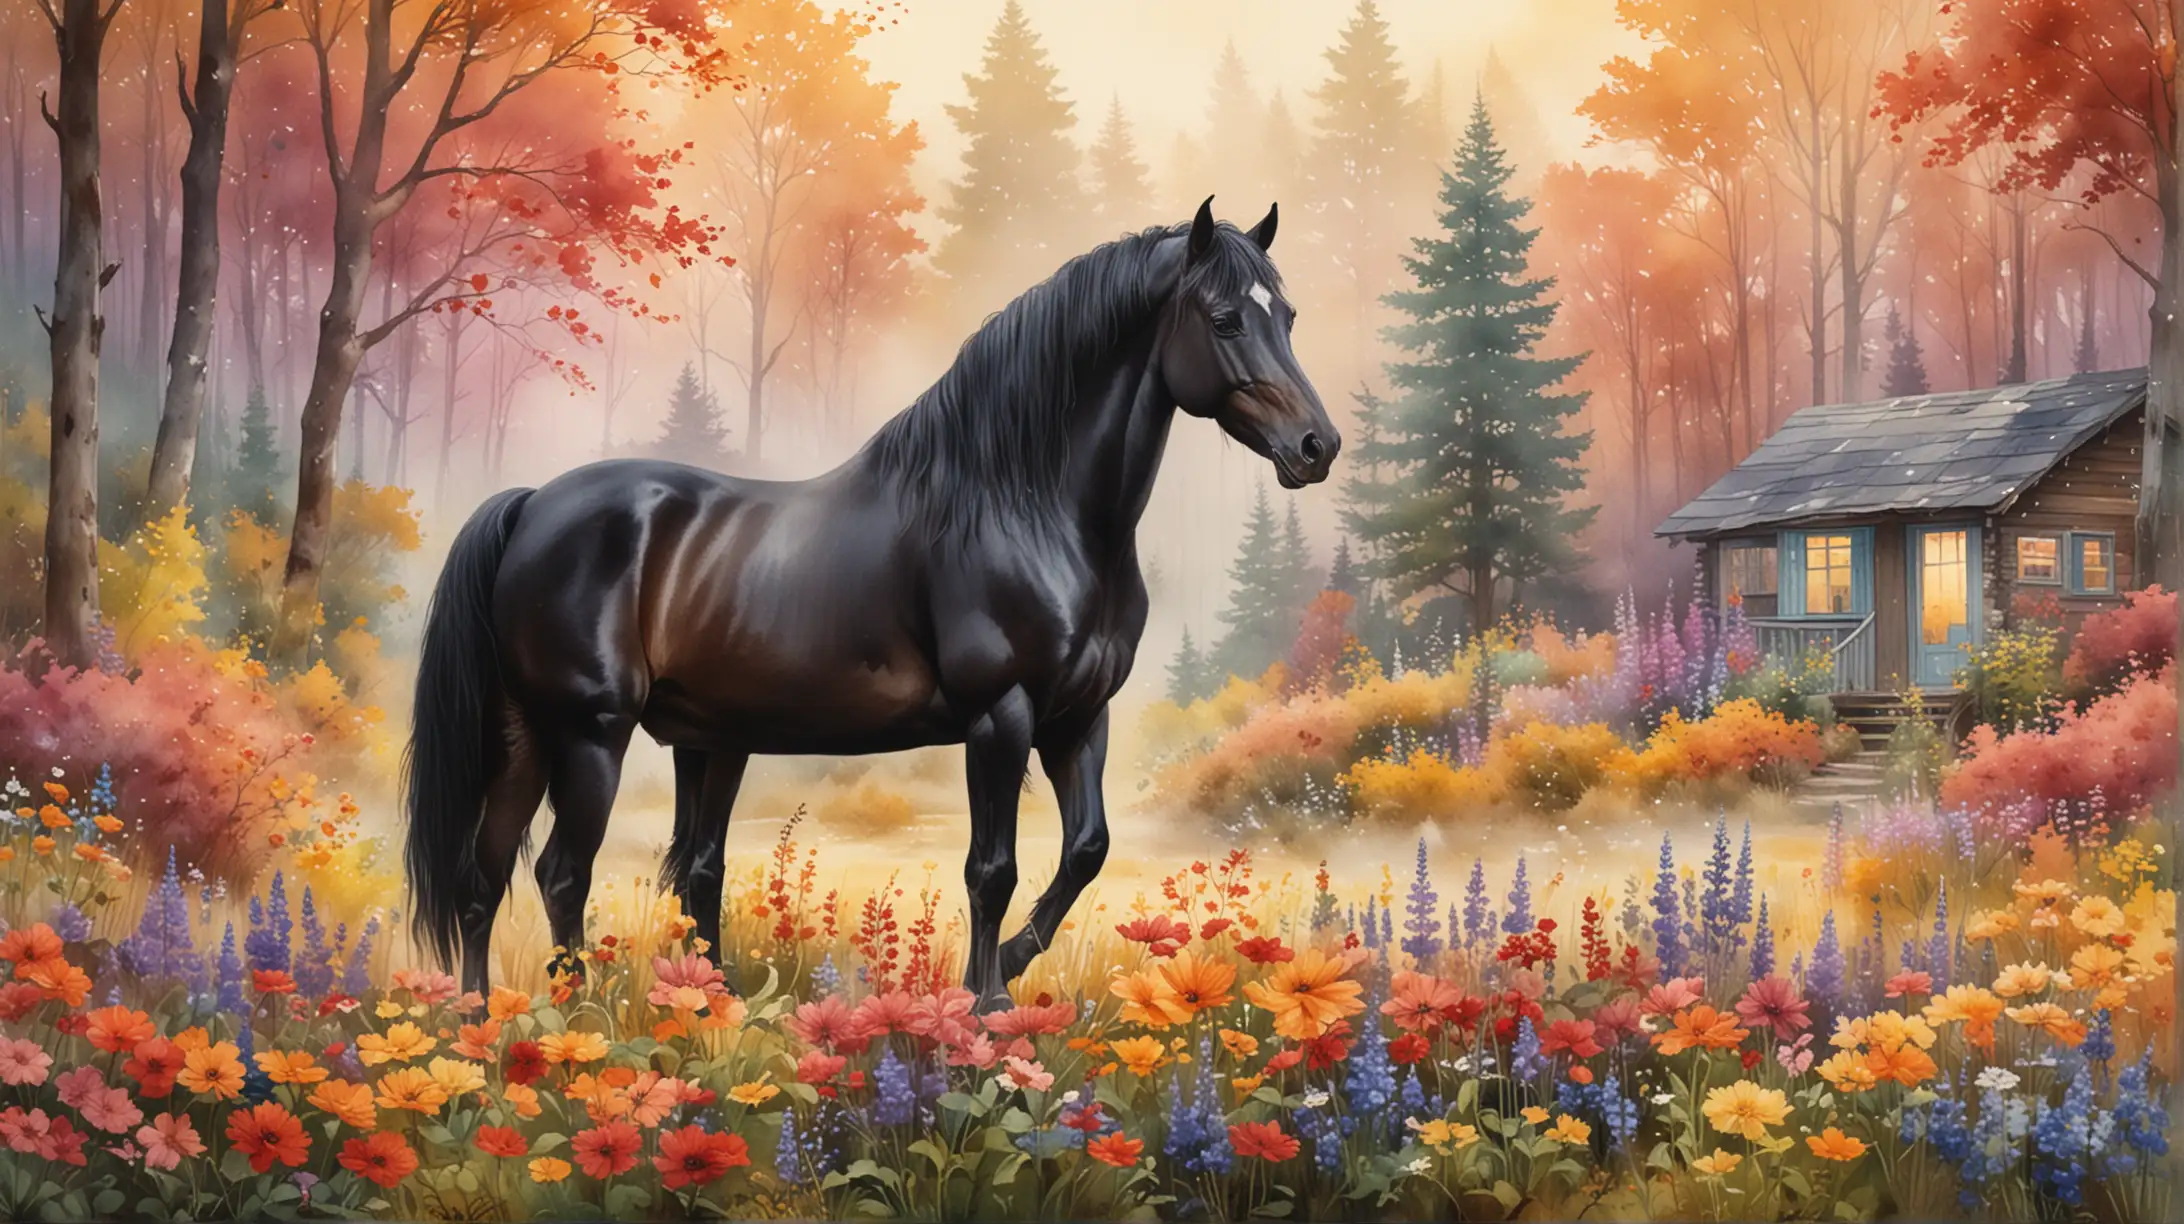 Majestic Black Stallion Rearing in Enchanted Autumn Forest